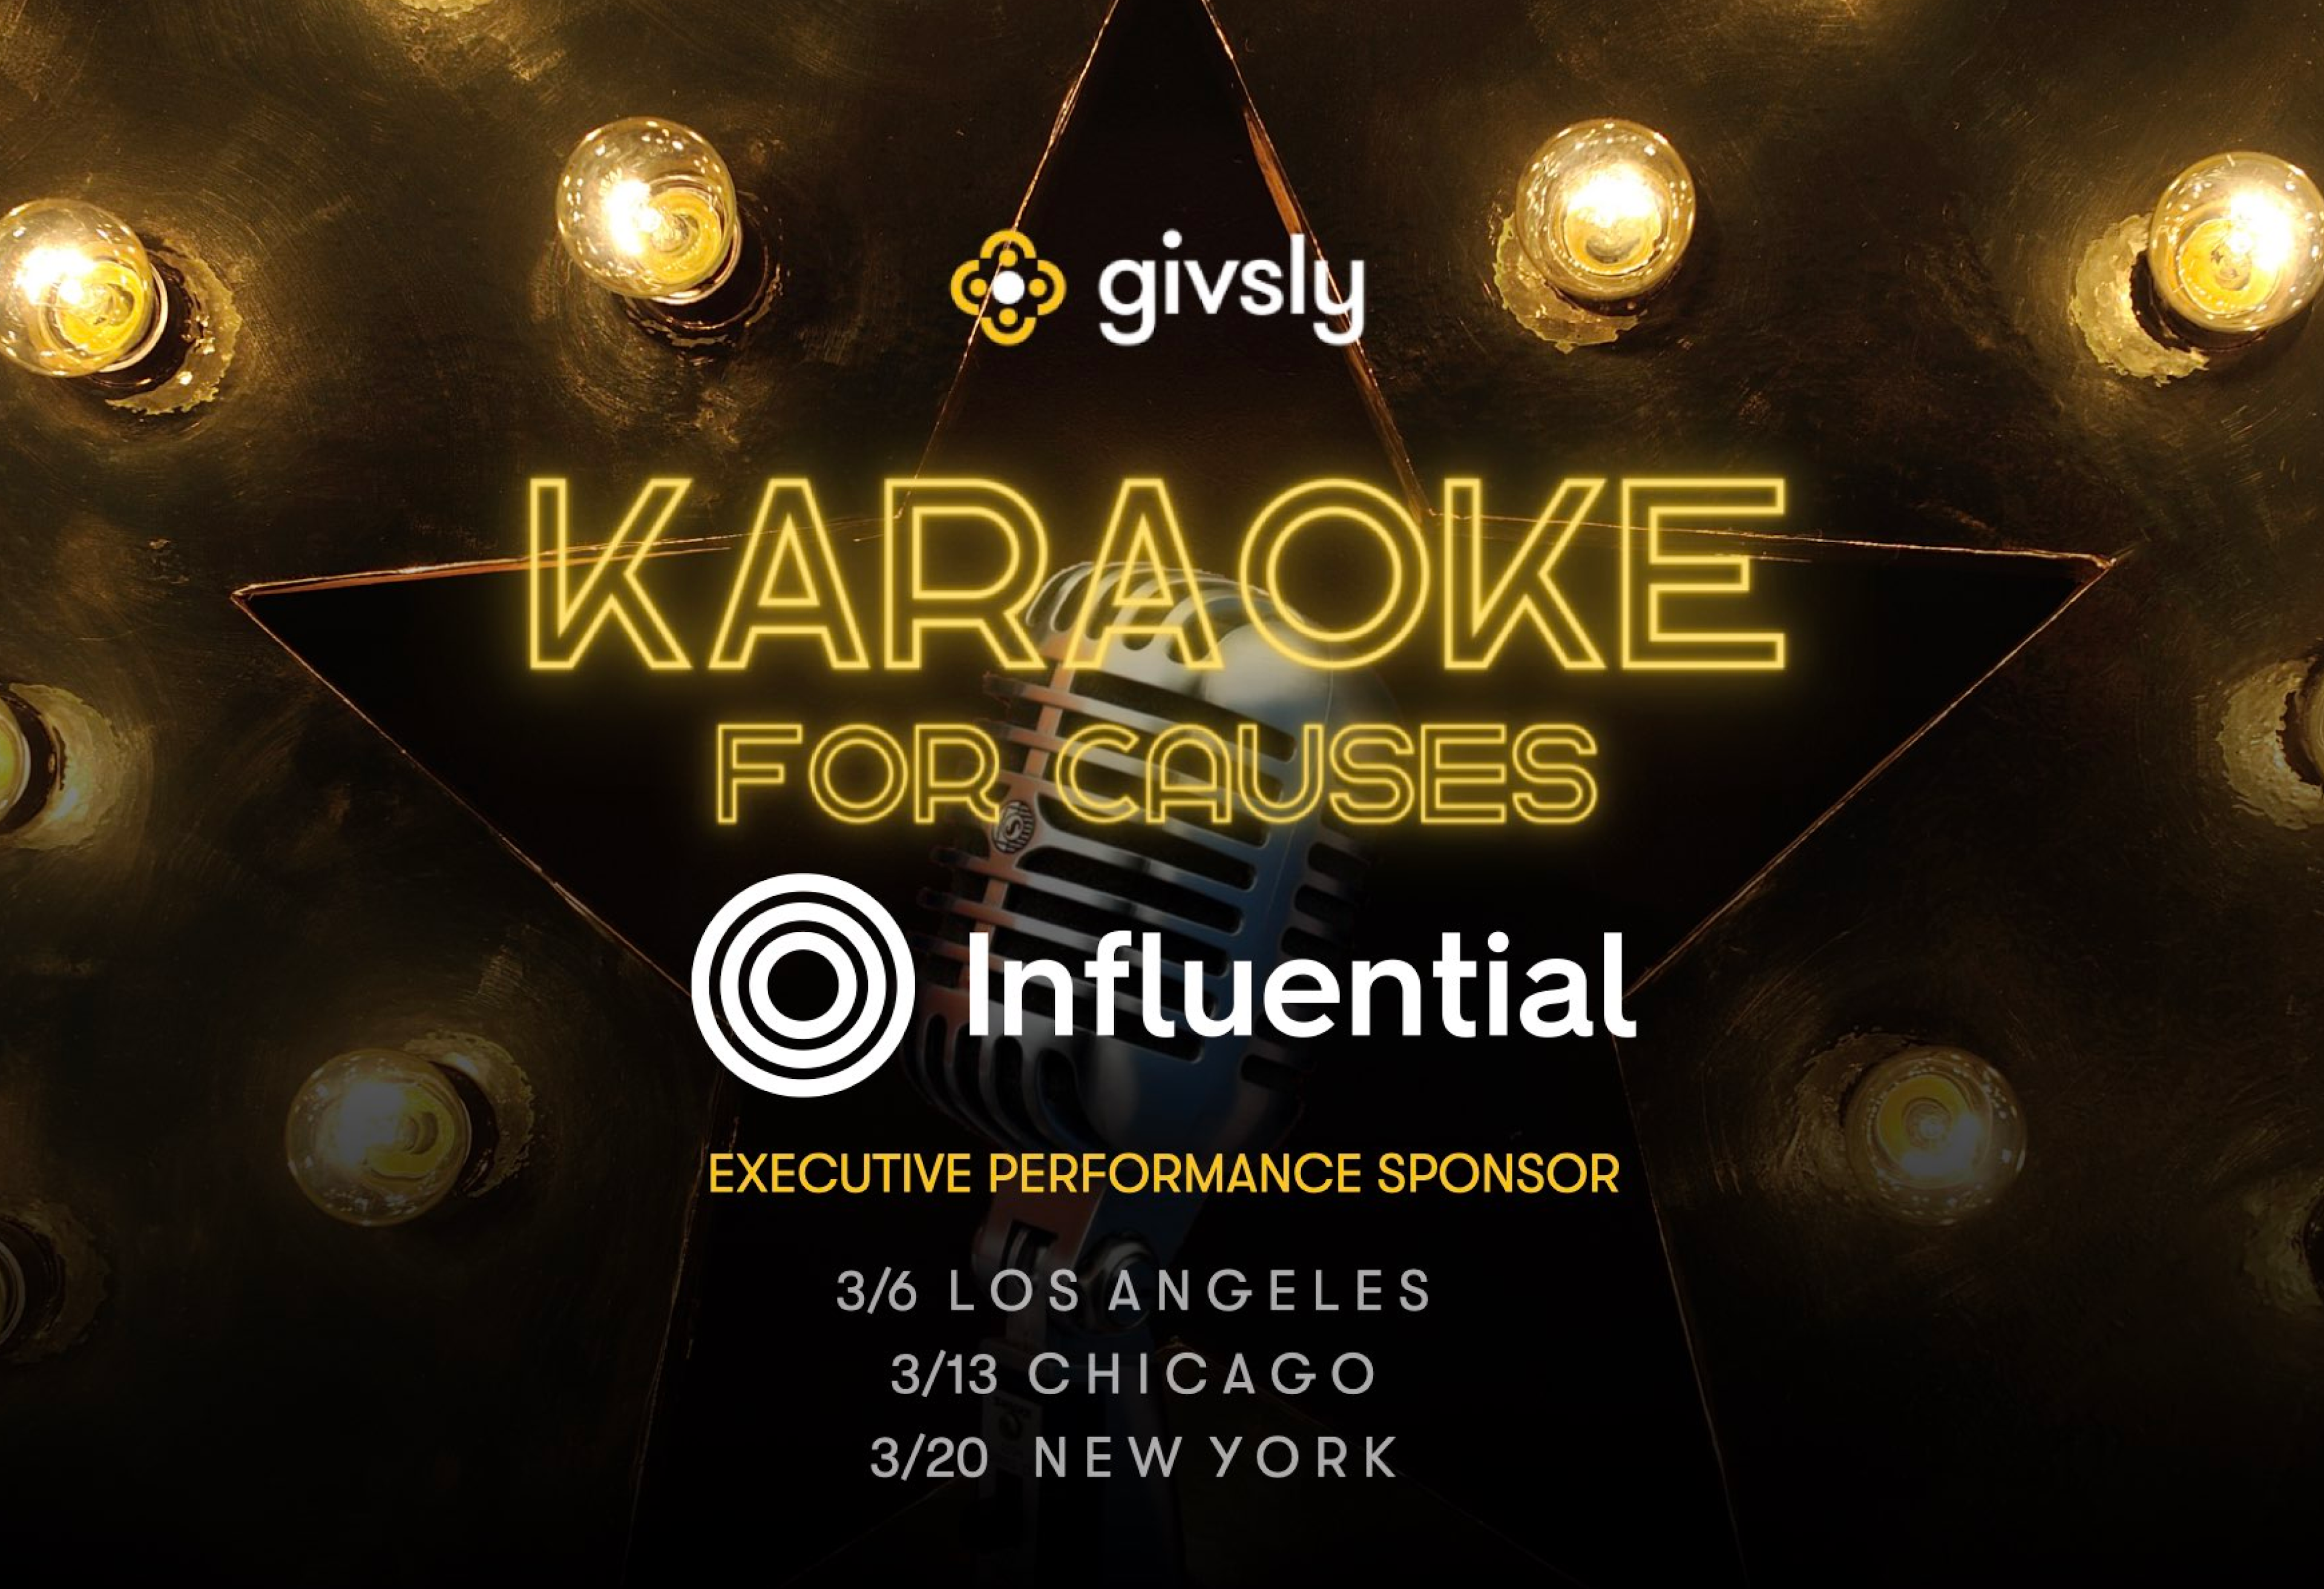 Influential as Executive Performance Sponsor for Givsly's Karaoke for Causes